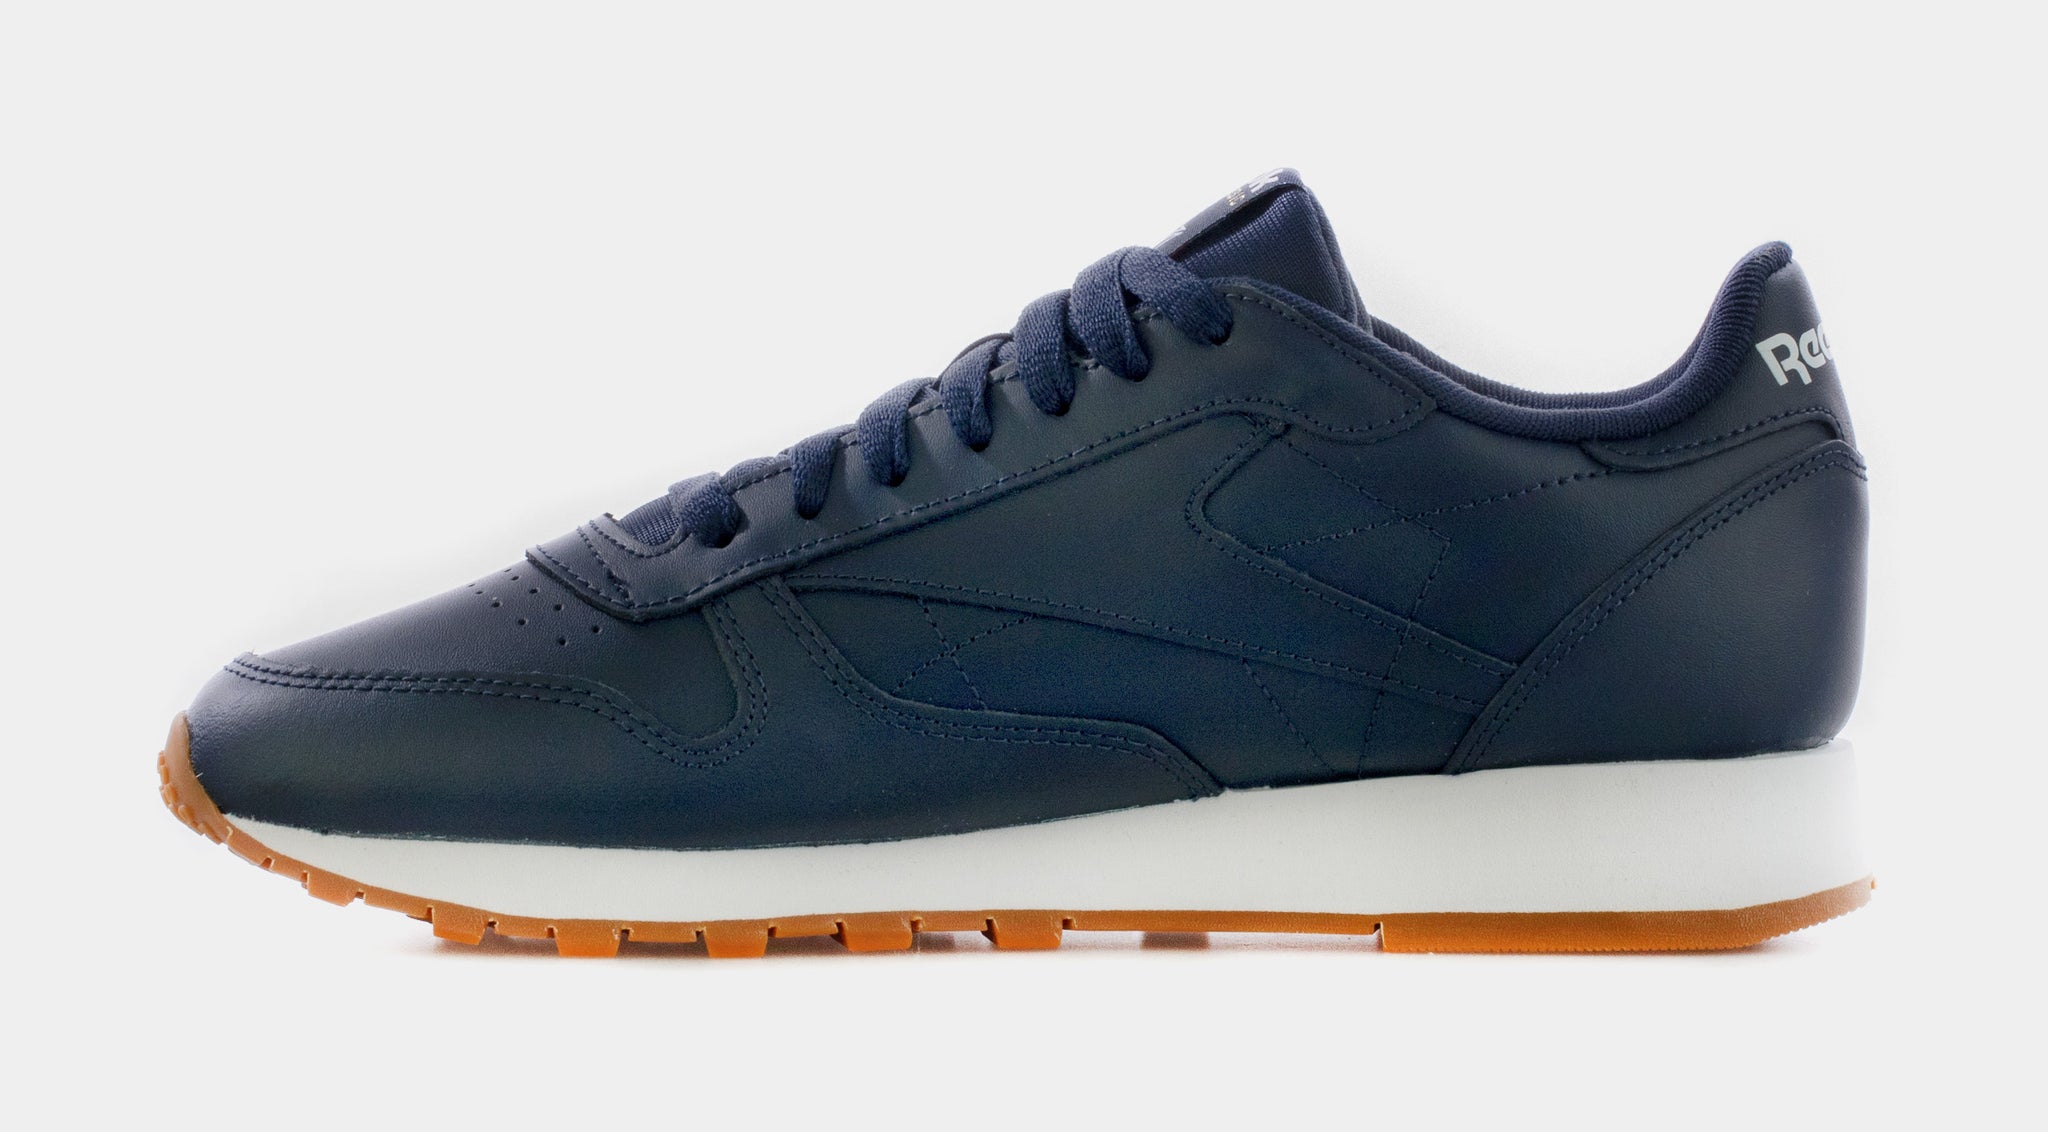 Reebok Classic Leather Blue Navy Shoes Lifestyle GY3600 Mens – Palace Shoe